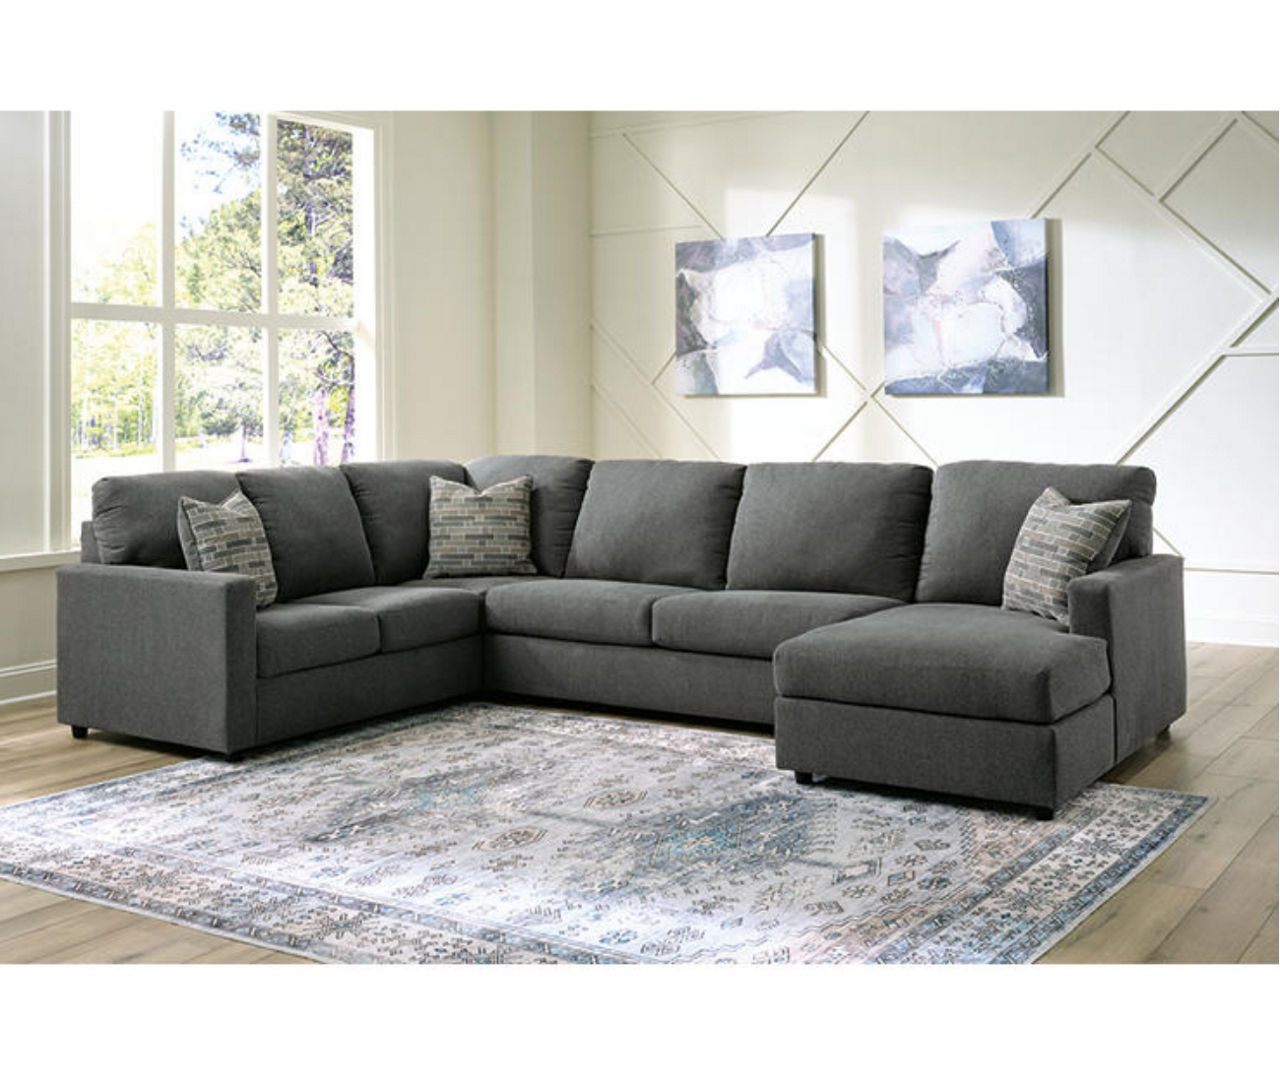 Signature Design By Ashley Edenfield Charcoal 3-Piece Sectional with Right-Facing Chaise